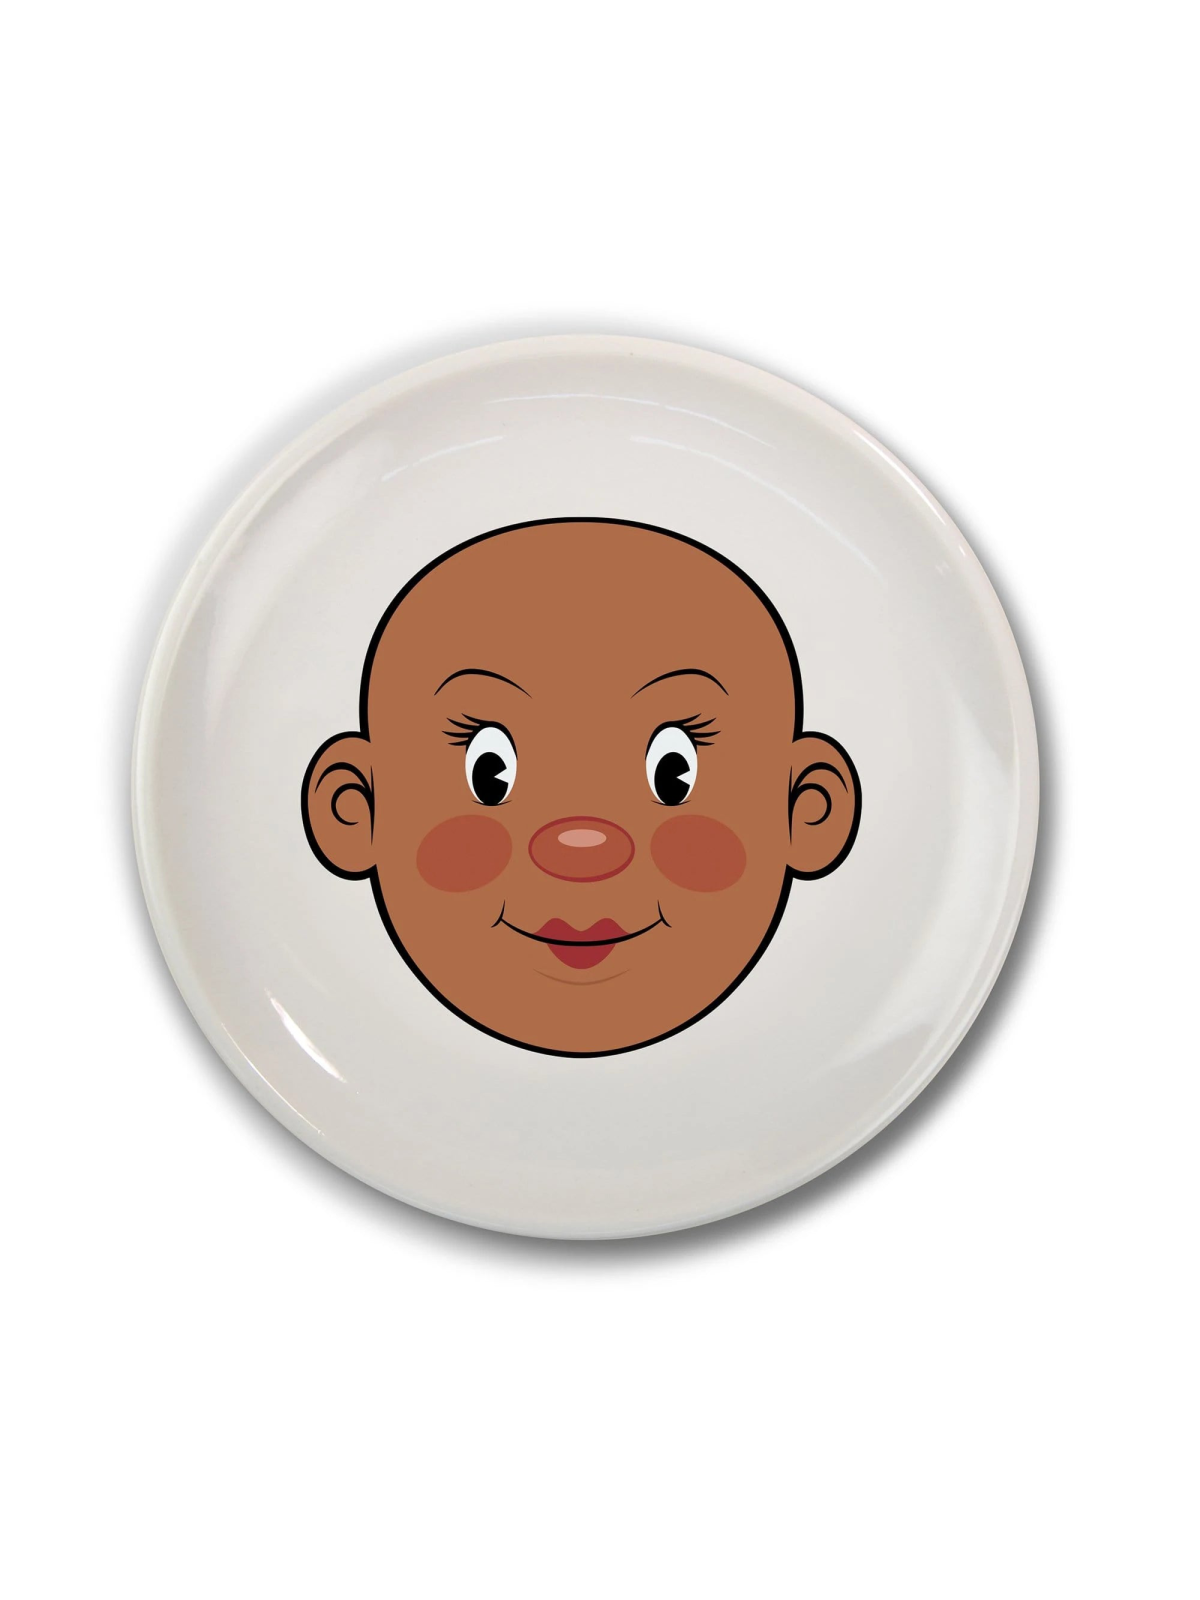 Ms. Food Face Dinner Plate